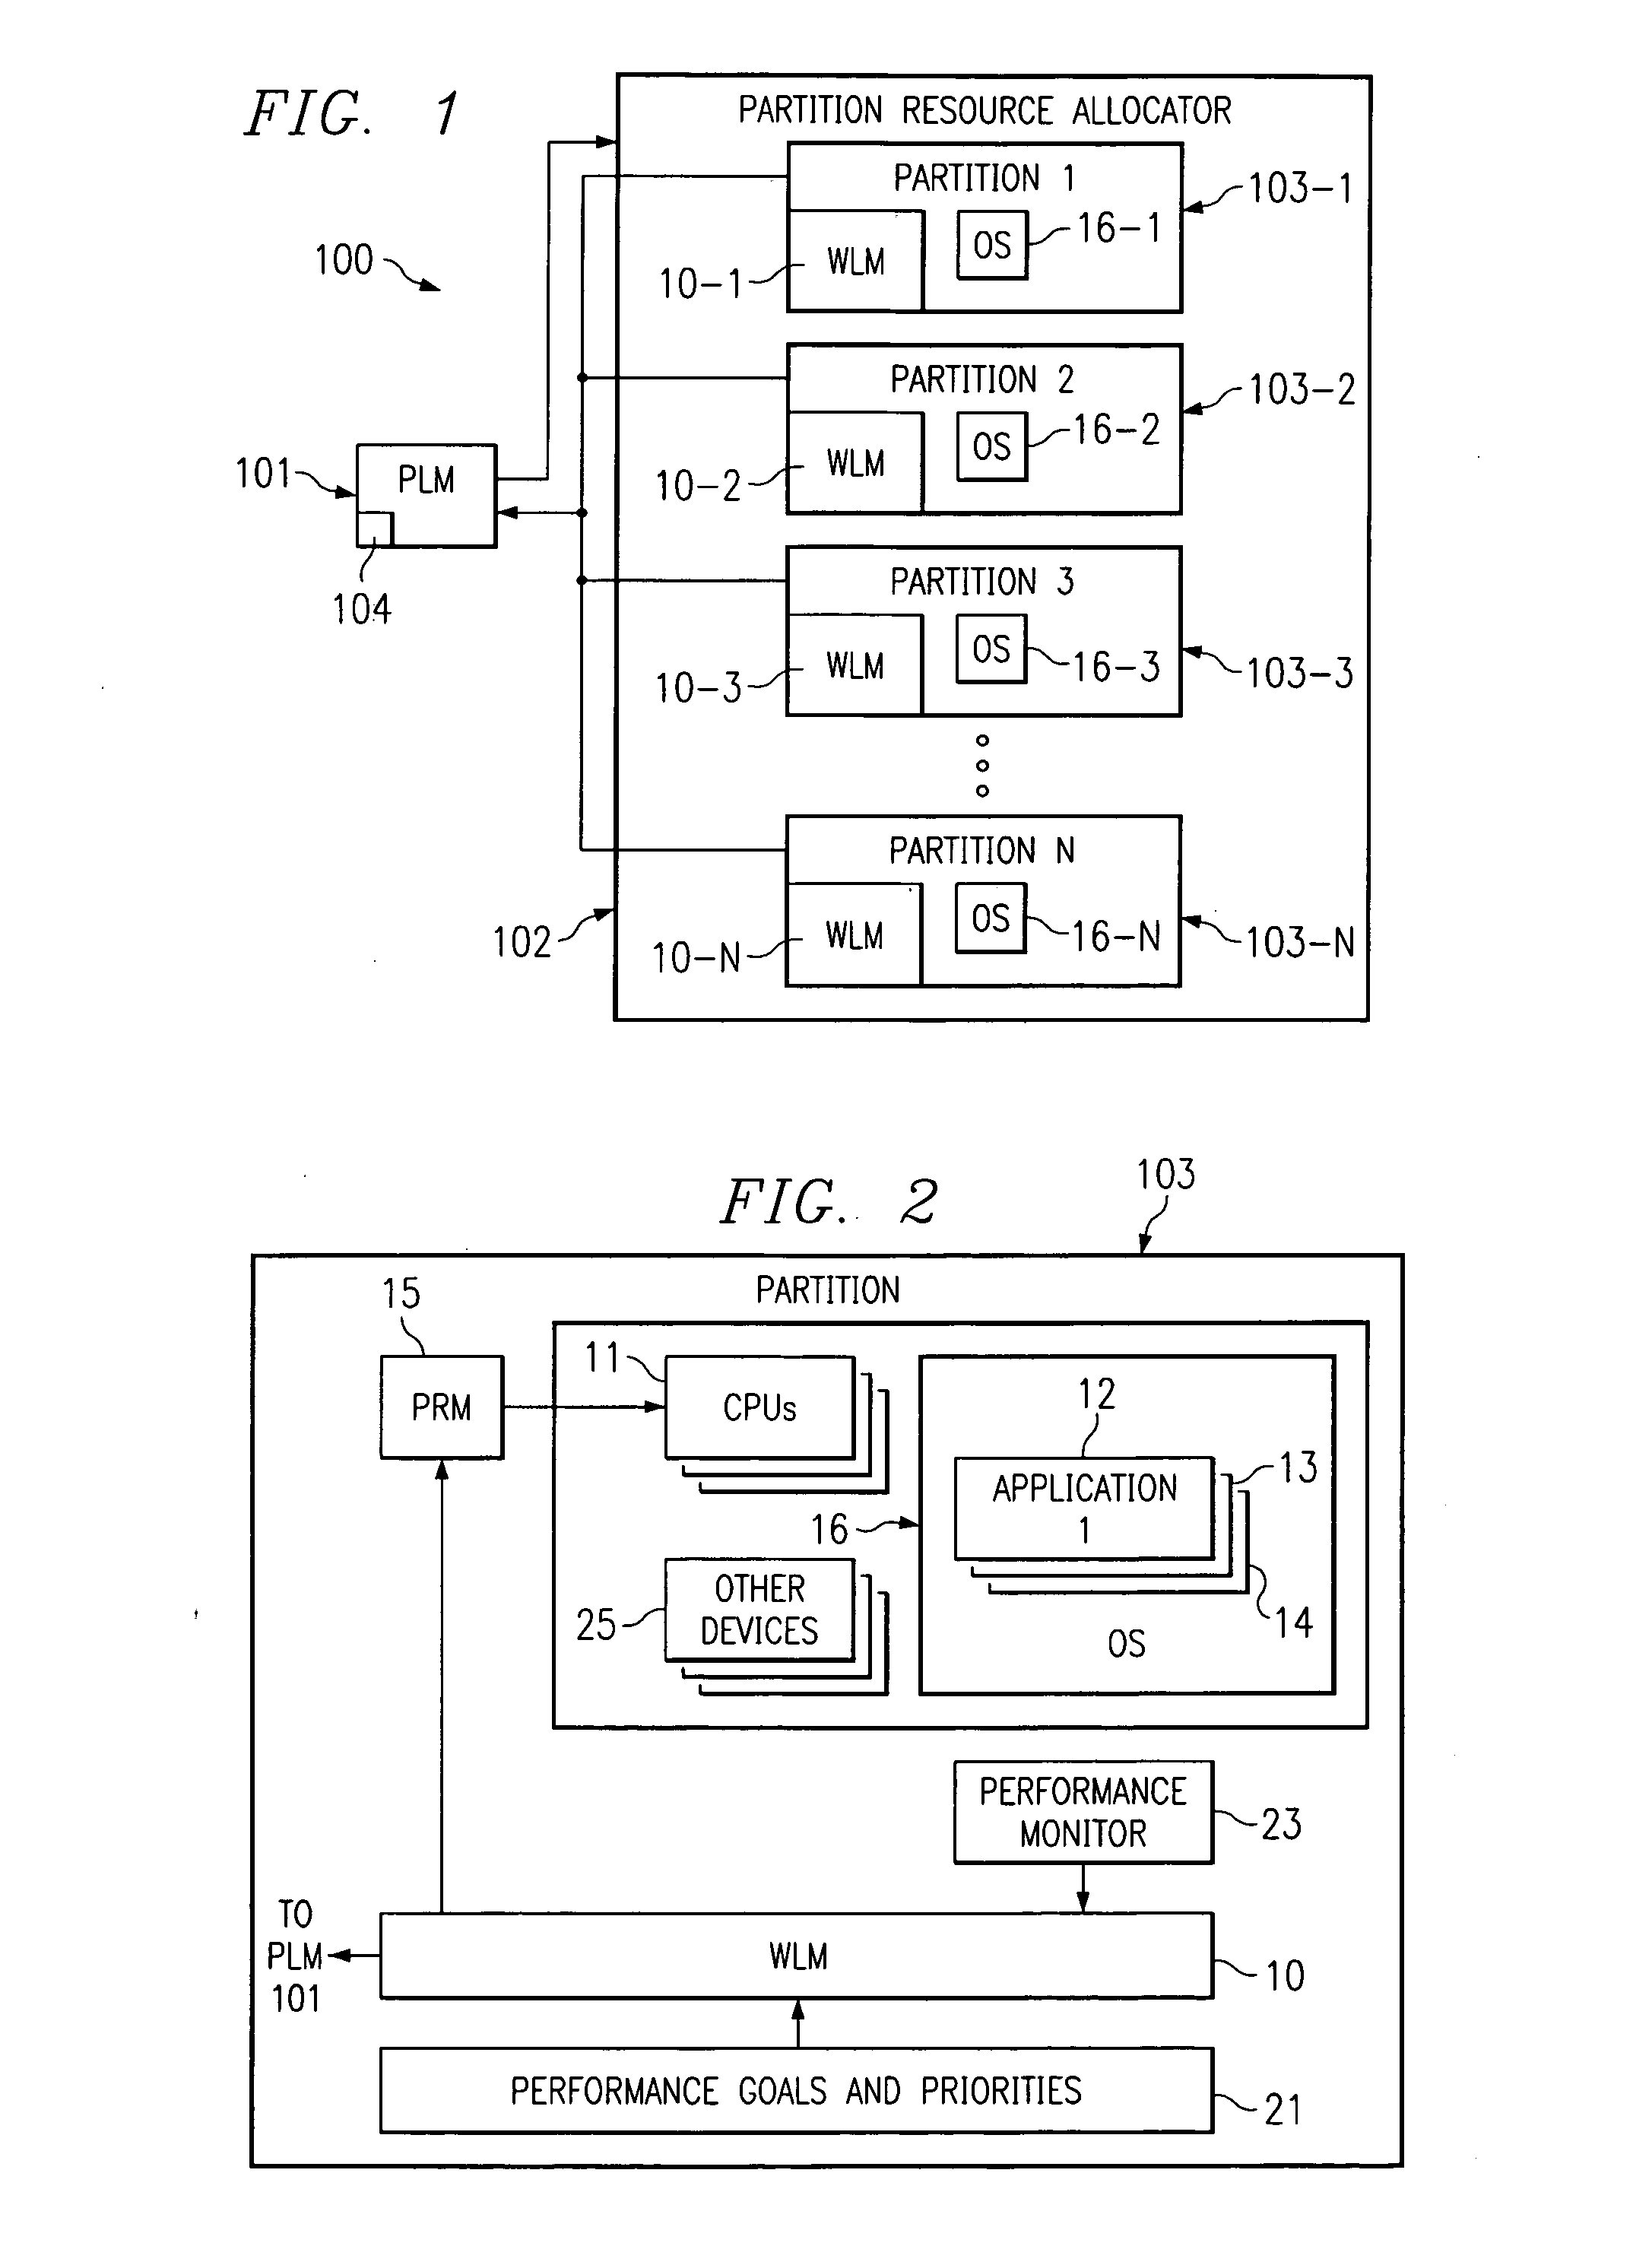 System and method for allocating a plurality of resources between a plurality of computing domains